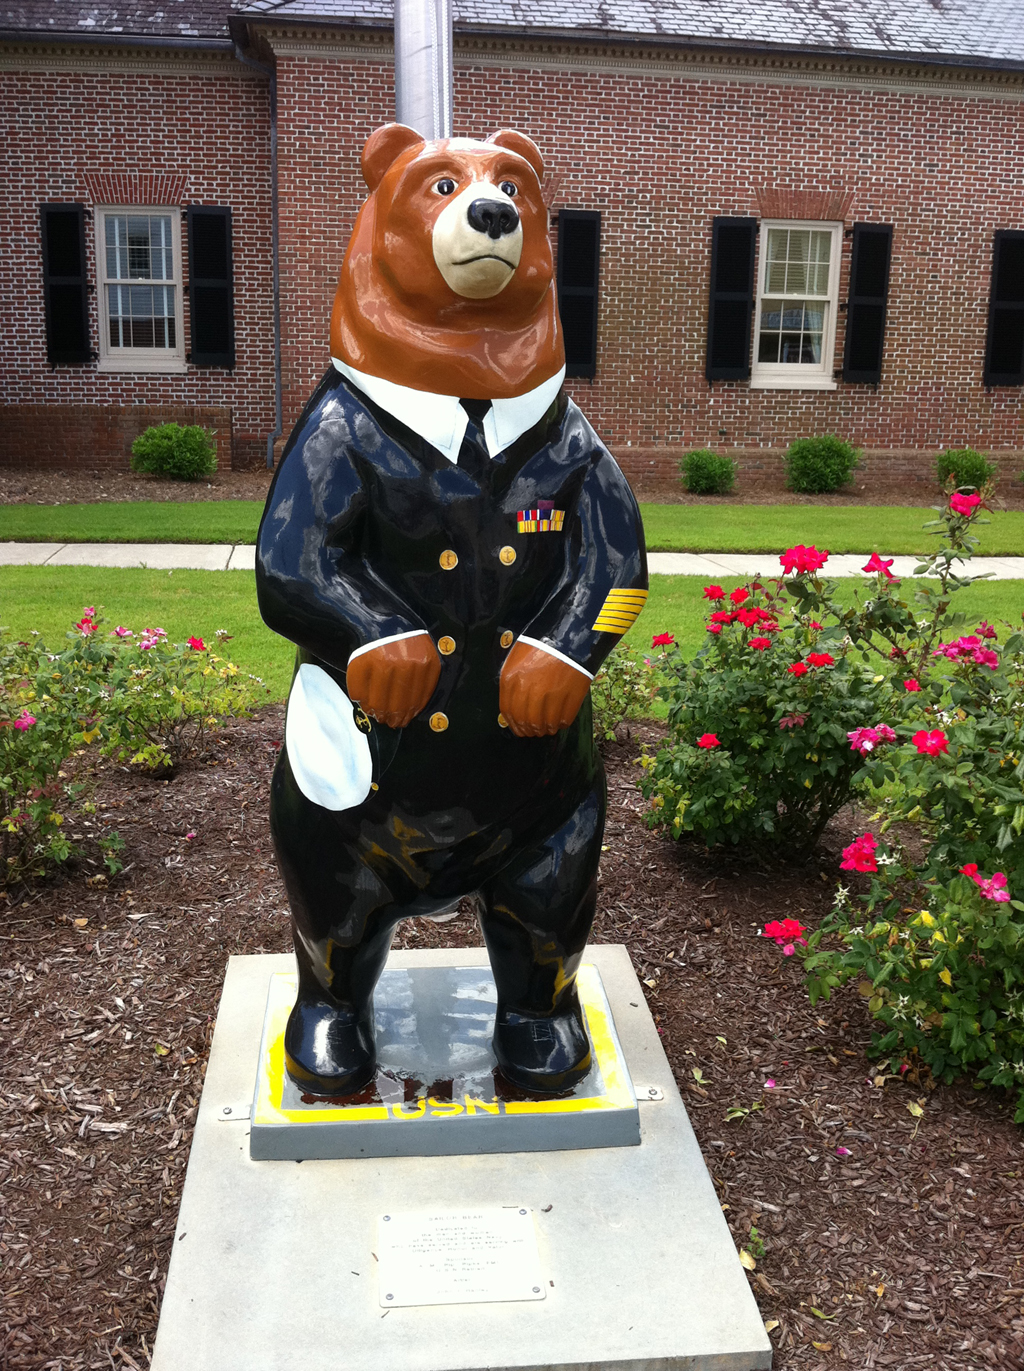 Life-size, hand painted fiberglass bear dressed in Navy blues in flower garden in front of a building.